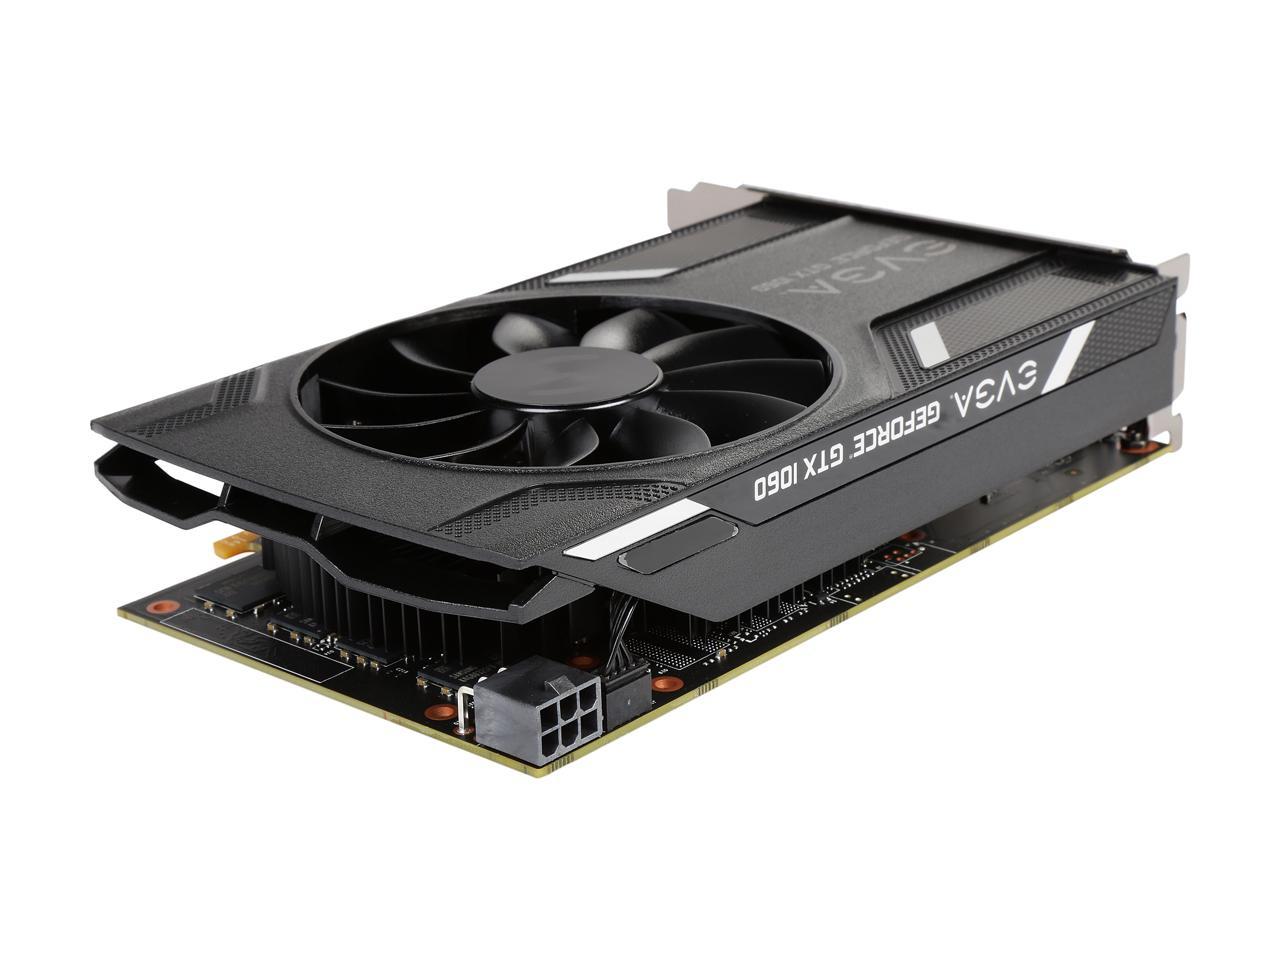 sovende Centralisere have Evga Geforce Gtx 1060 Gaming, Acx 2.0 (Single Fan), – TeciSoft